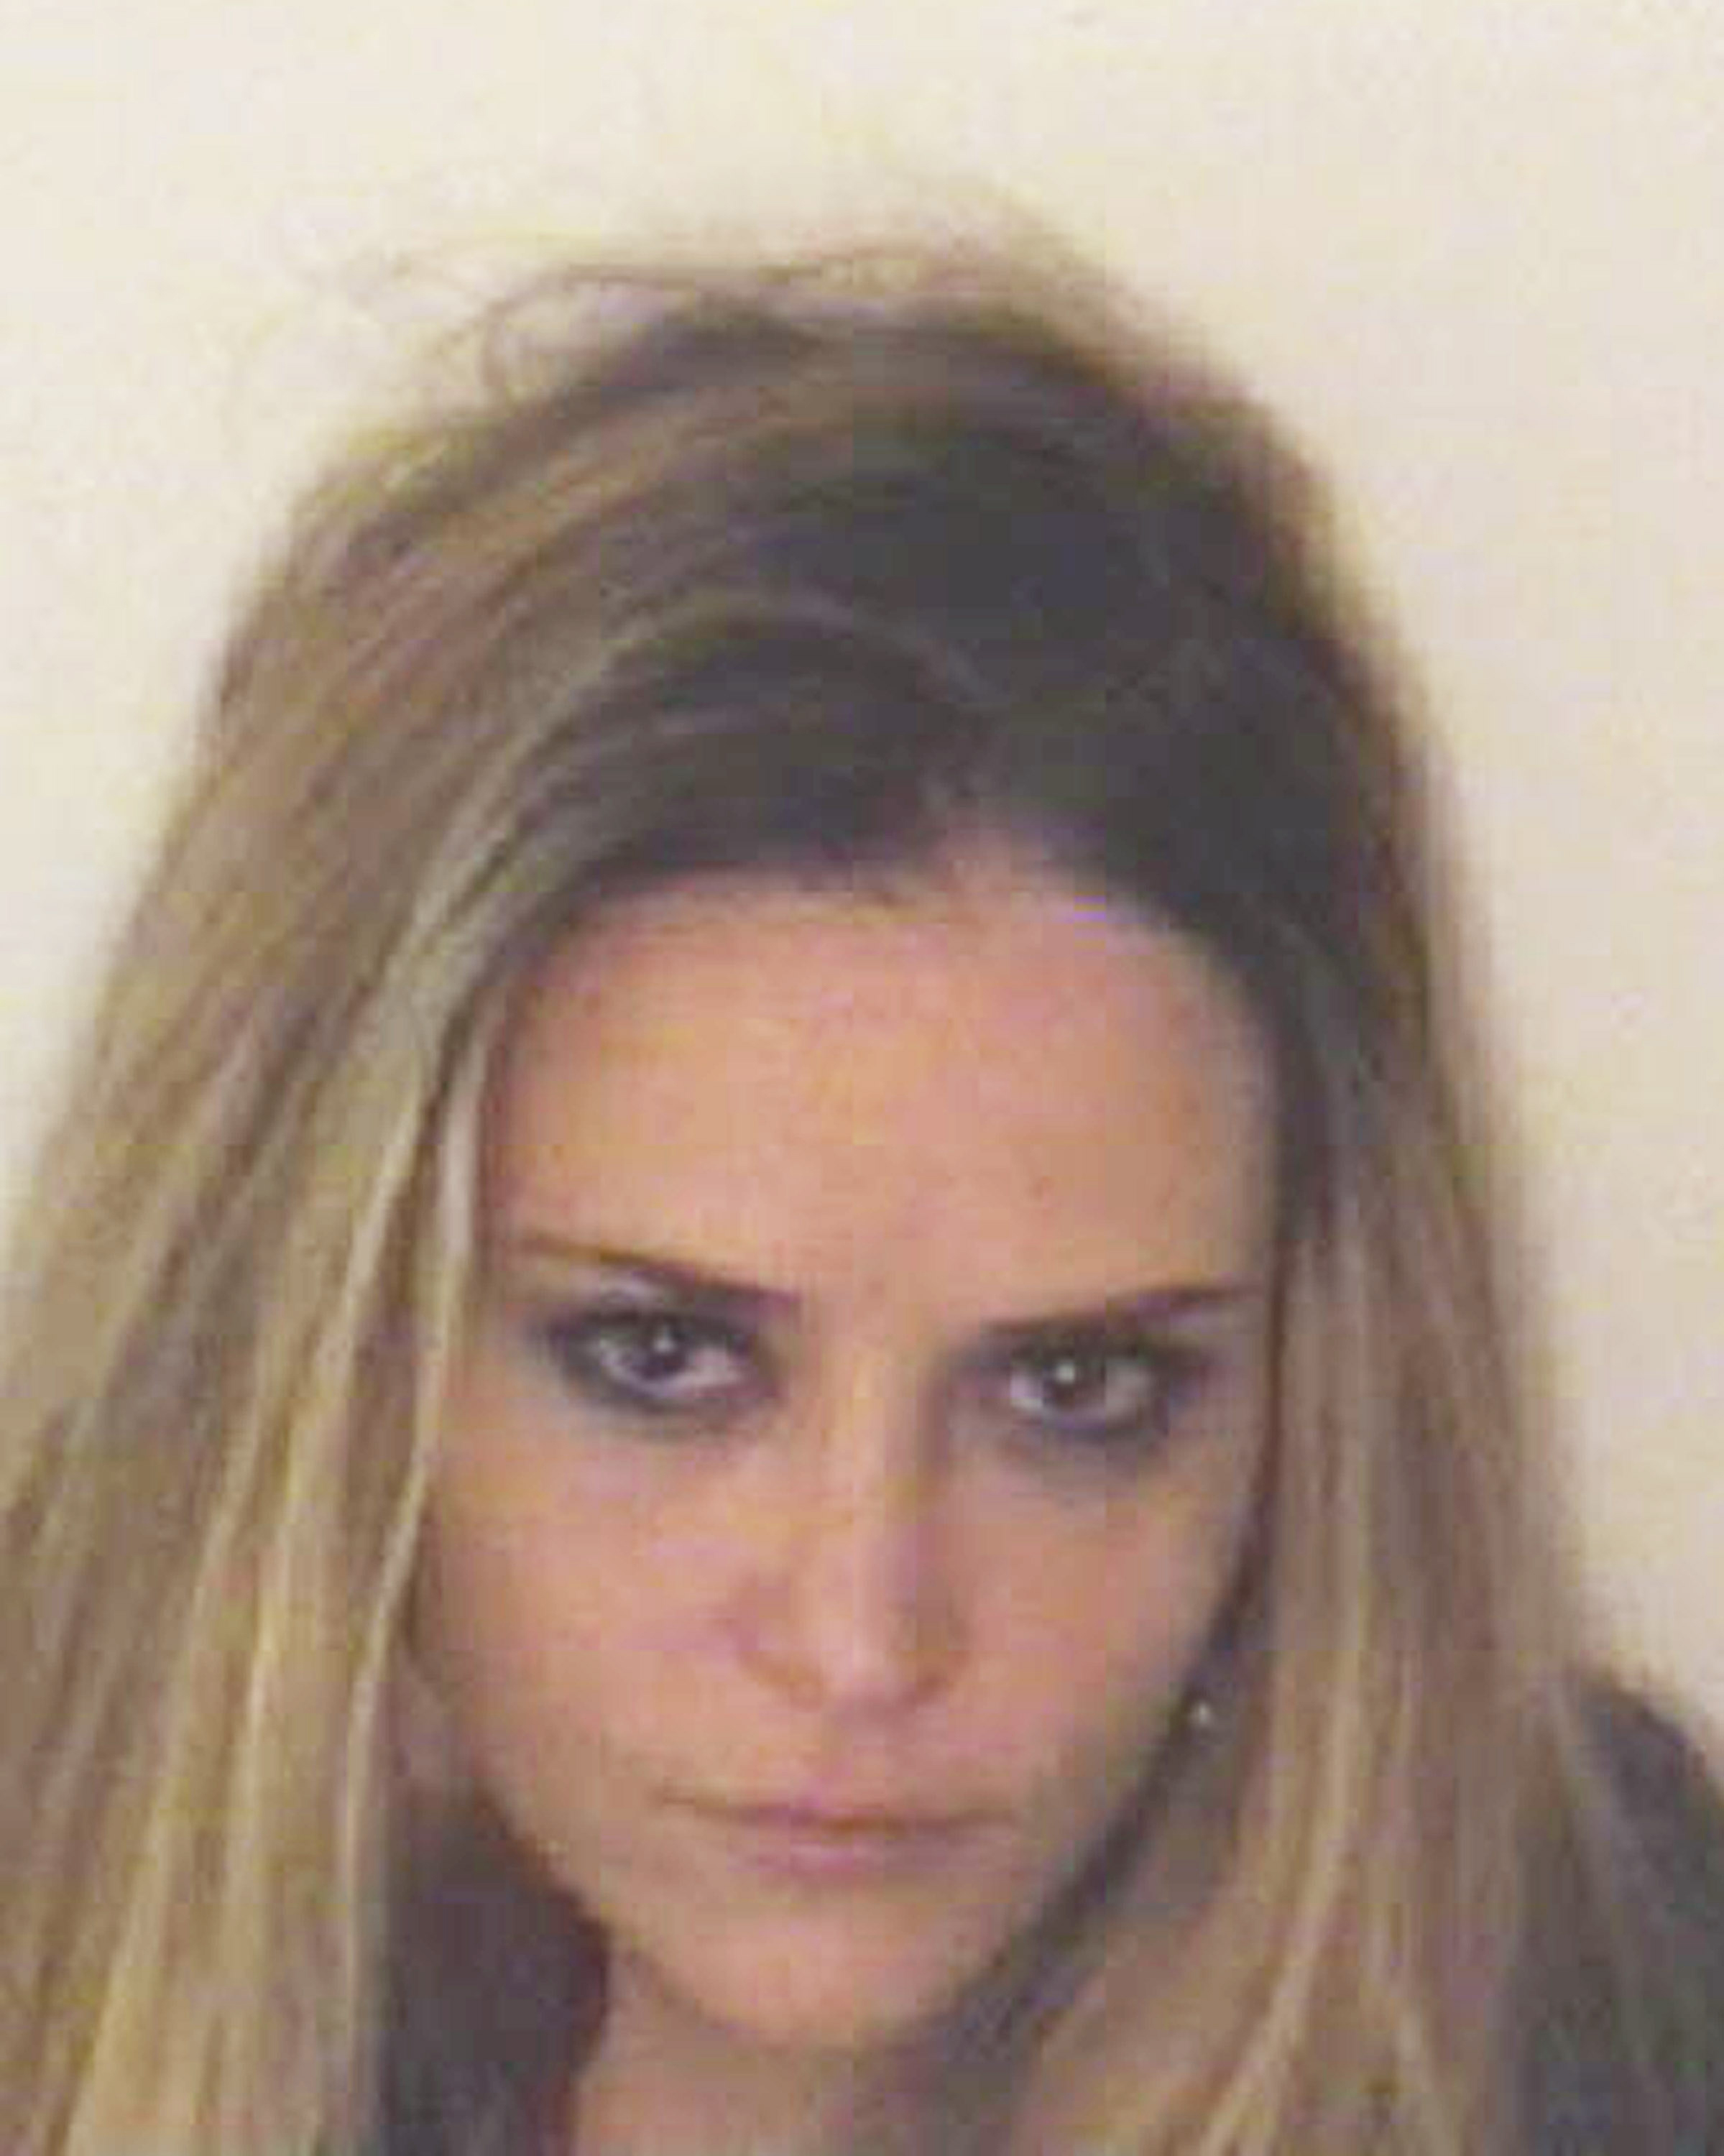 A handout photograph of 34-year-old Brooke Mueller posing for her mugshot after being arrested on December 3, 2011, in Aspen, Colorado | Source: Getty Images